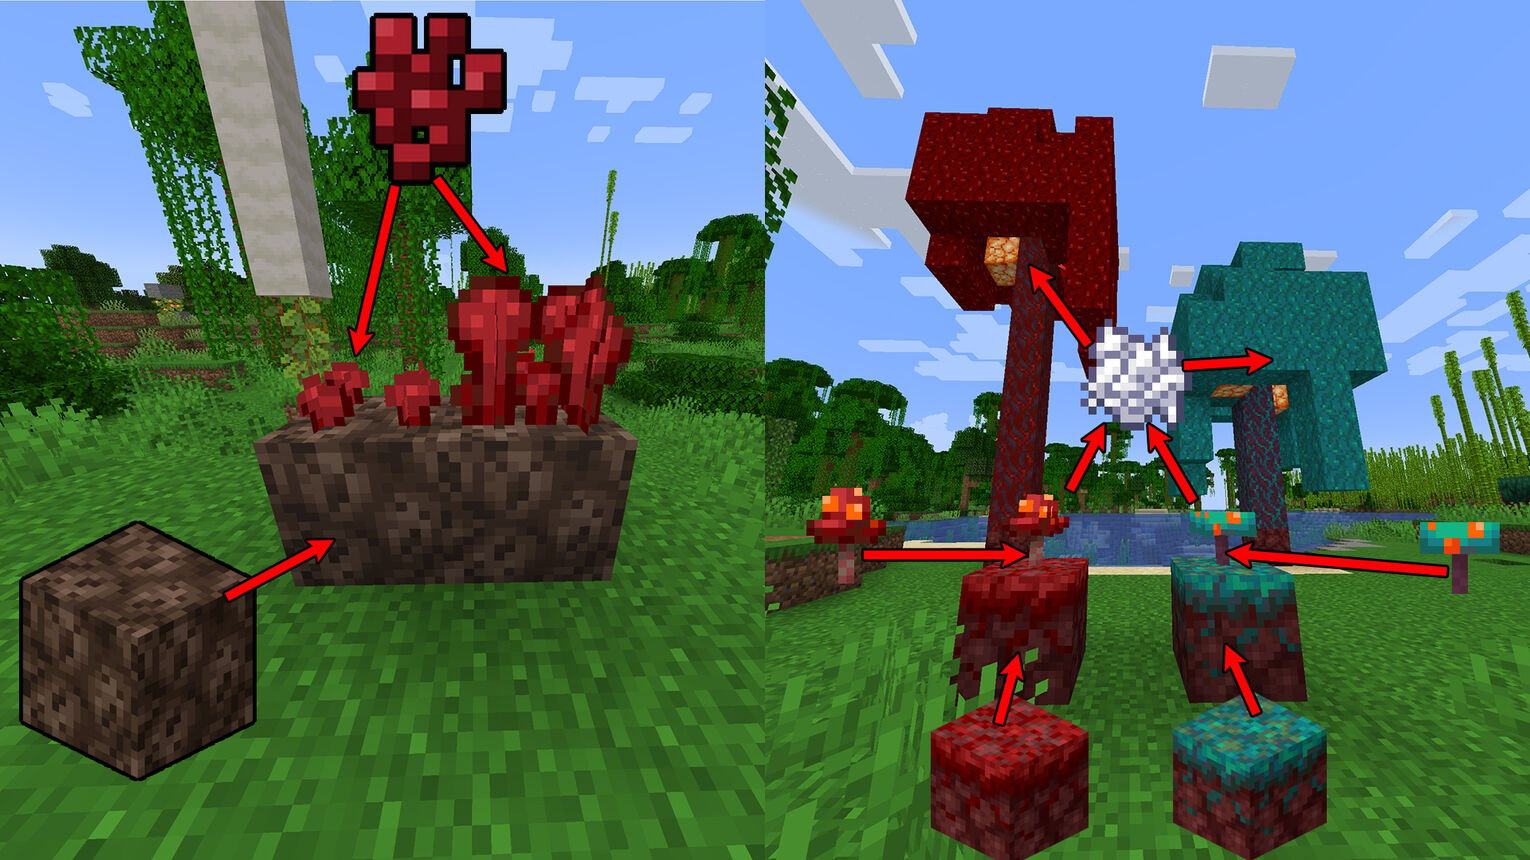 Minecraft Growing Nether Wart and Fungus